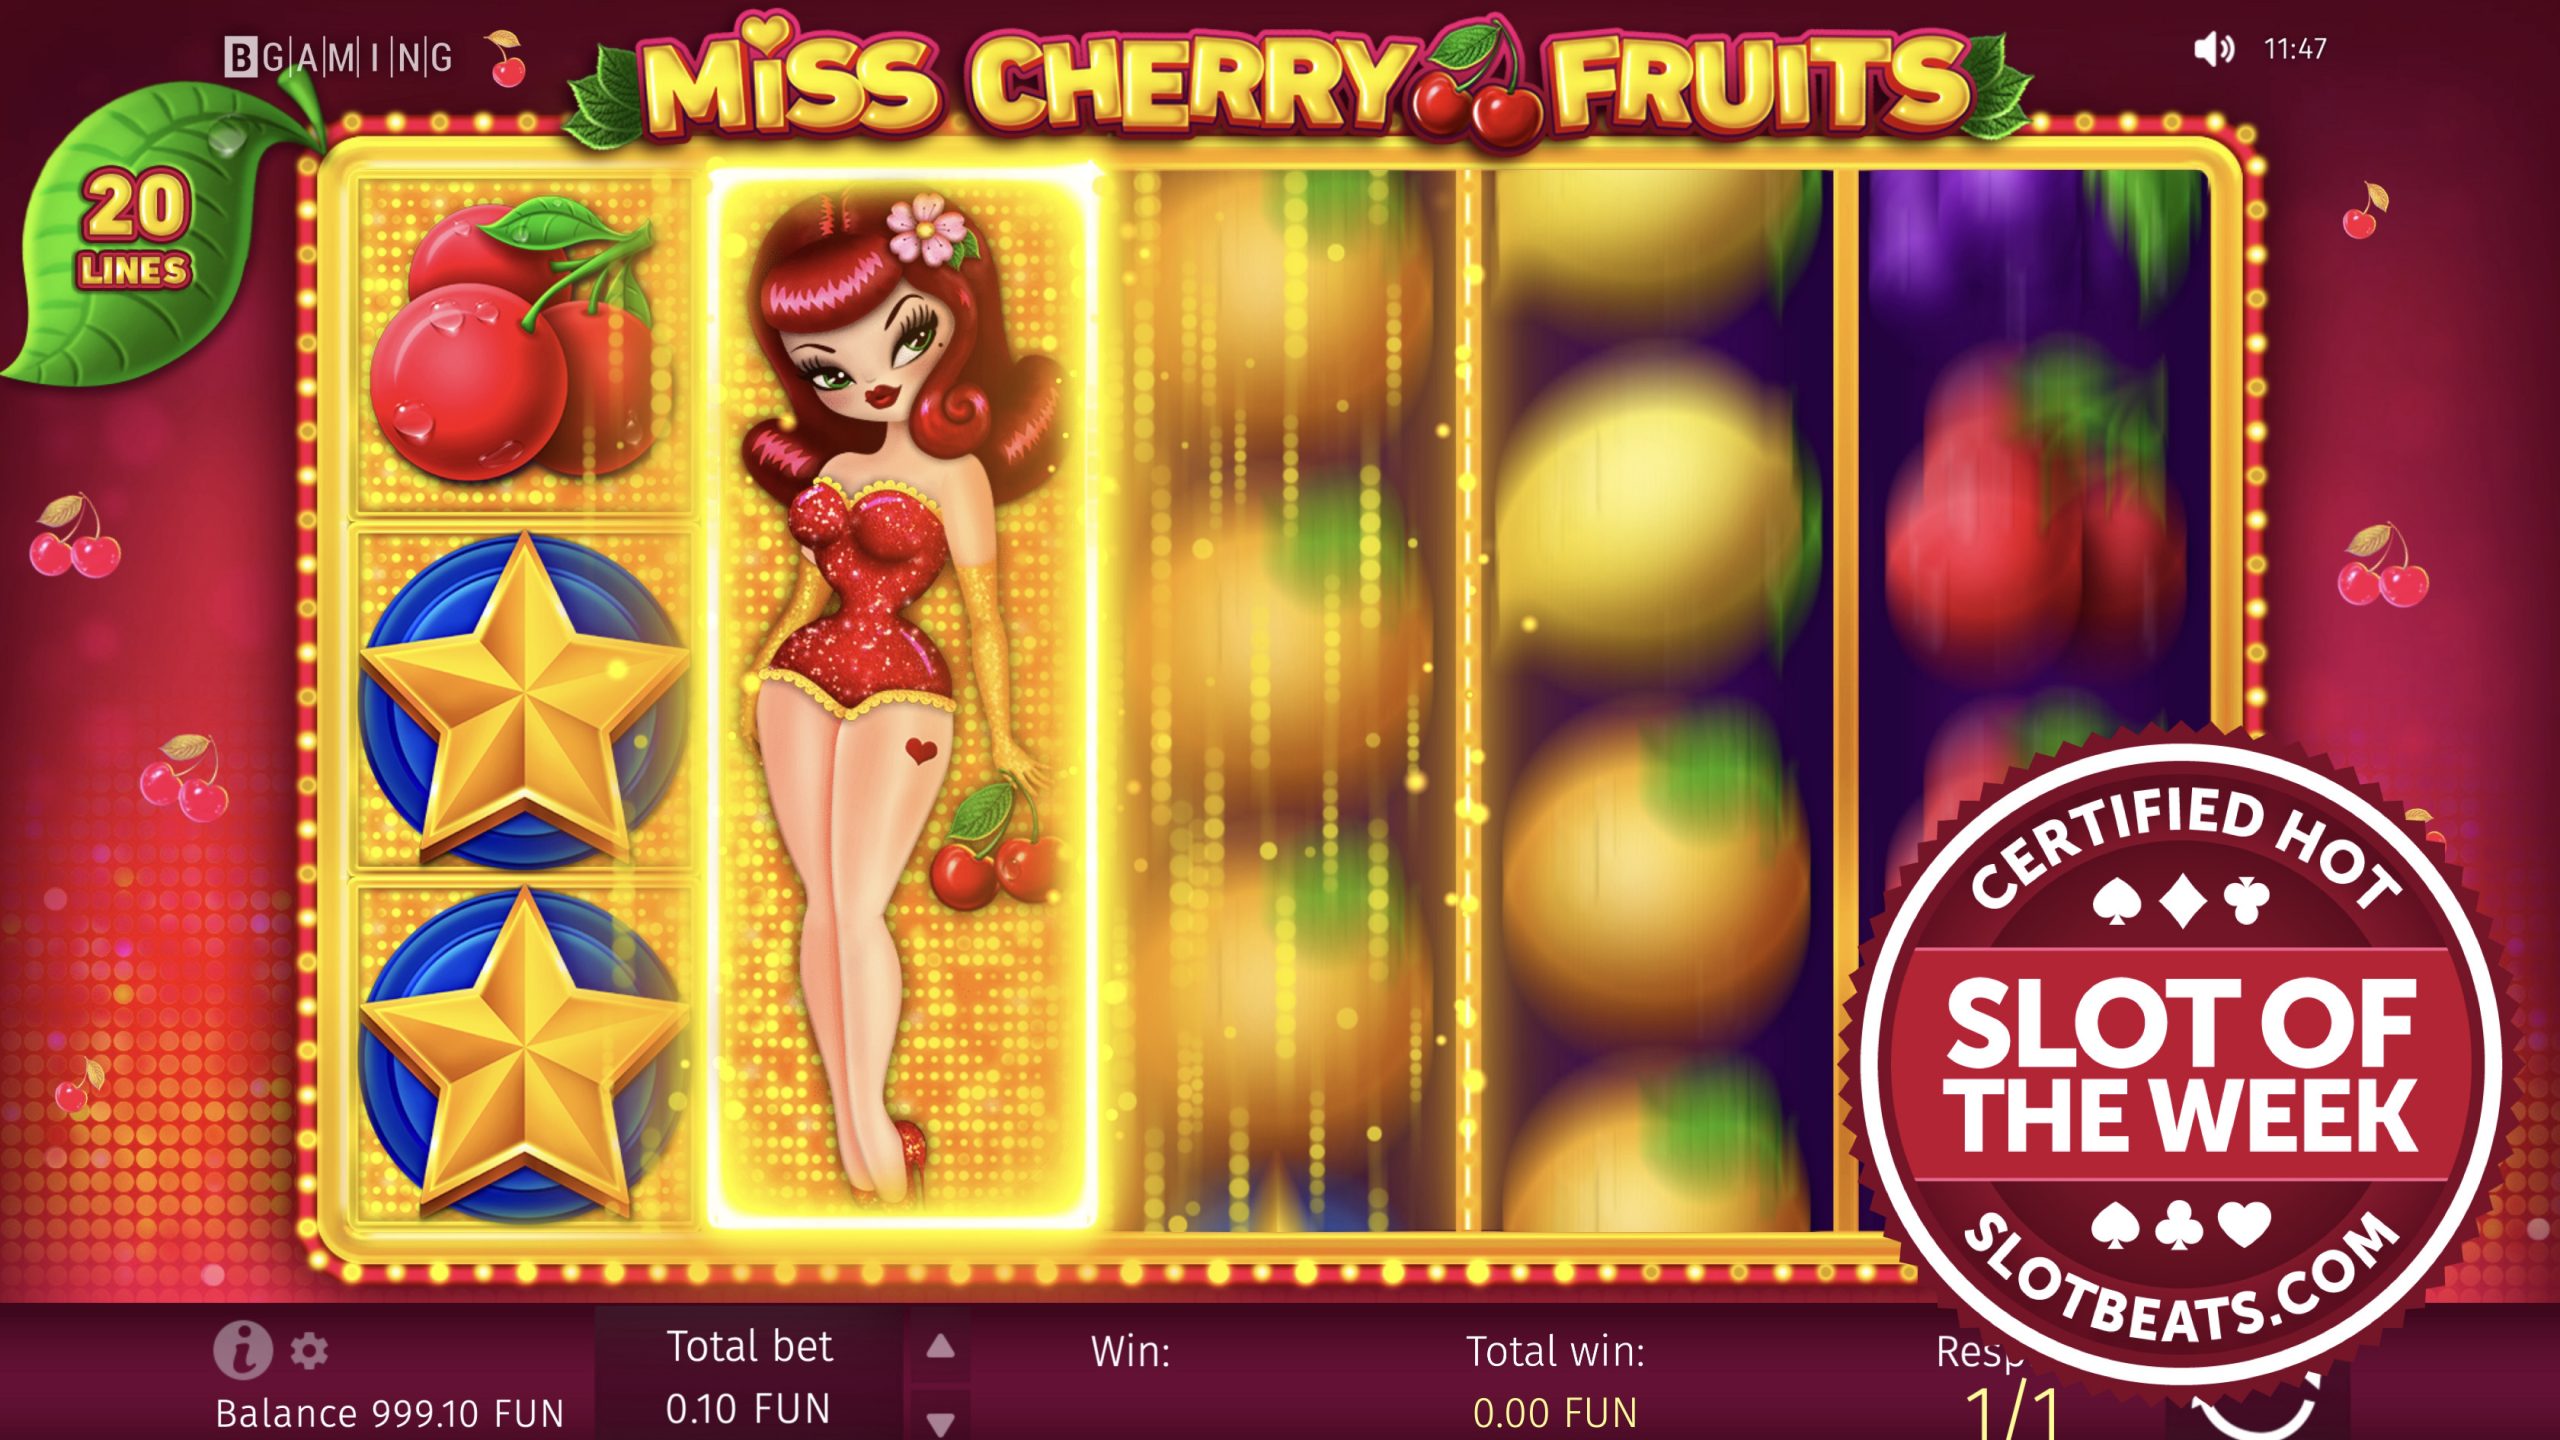 BGaming has claimed this week’s Slot of the Week award with its all-new “traditional-style” slot title, Miss Cherry Fruits.